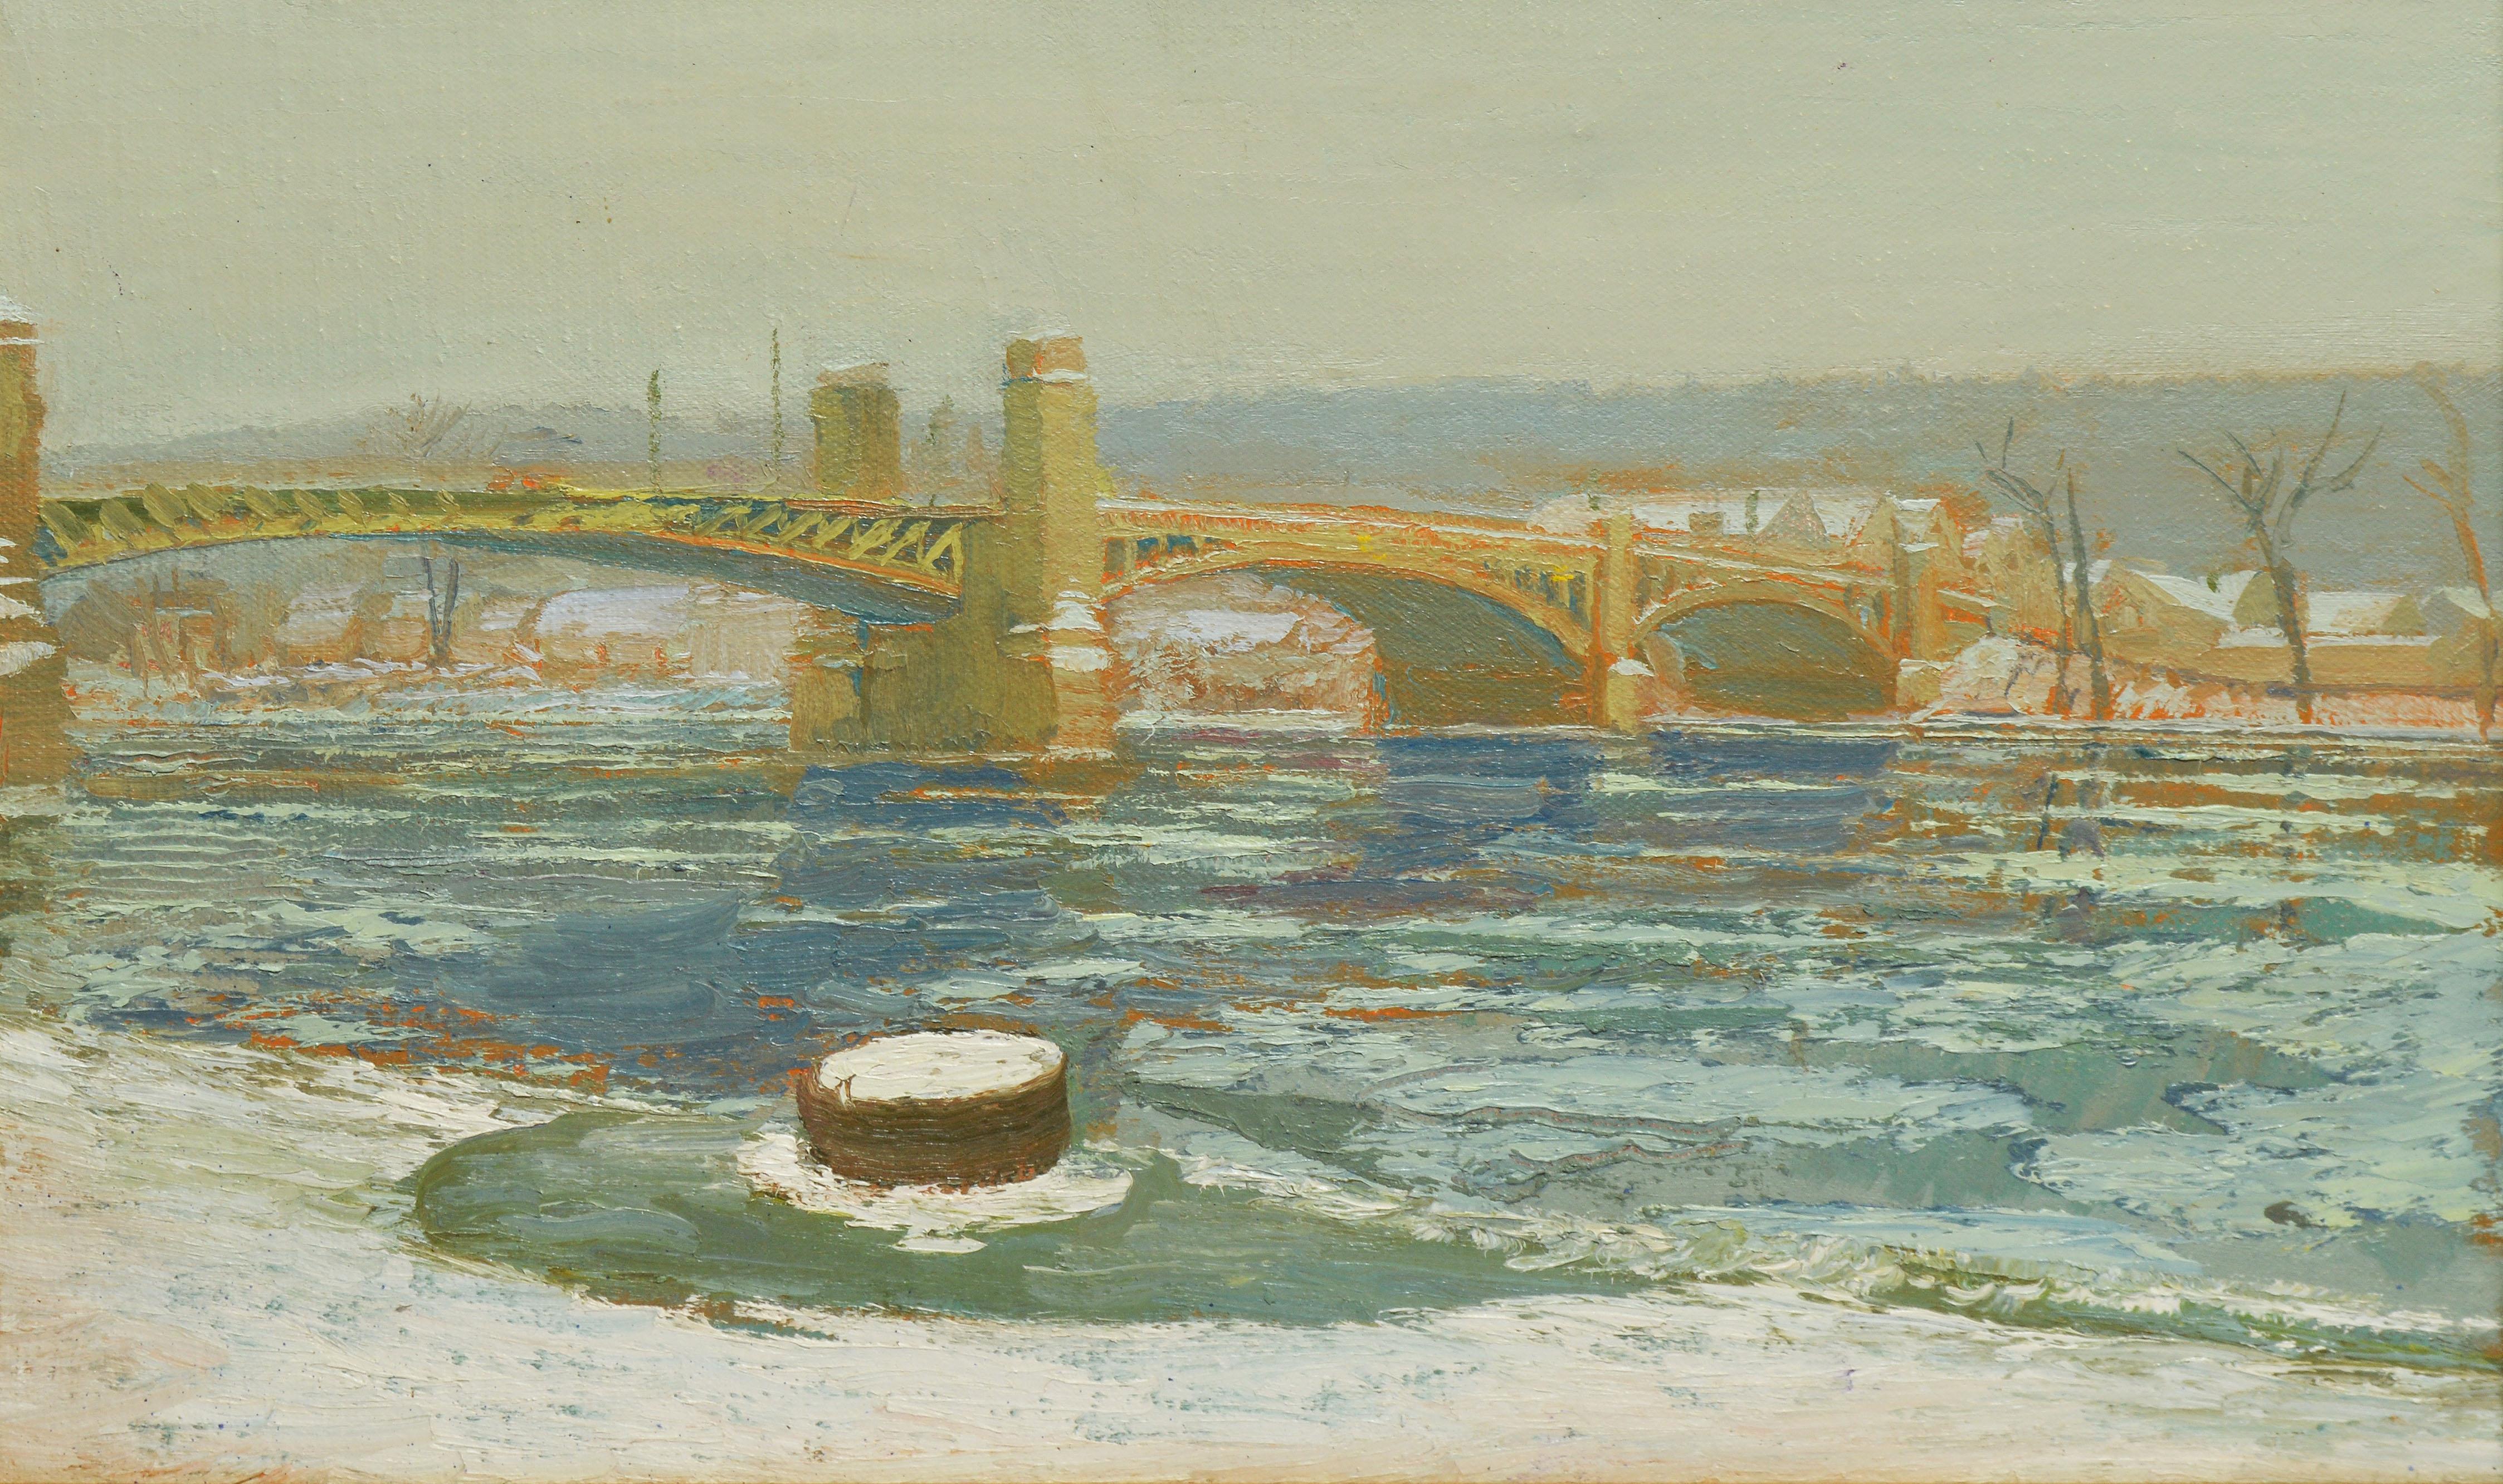 Winter Impressionist Landscape Oil Painting by Harry Orlyk, Green Island Bridge 2